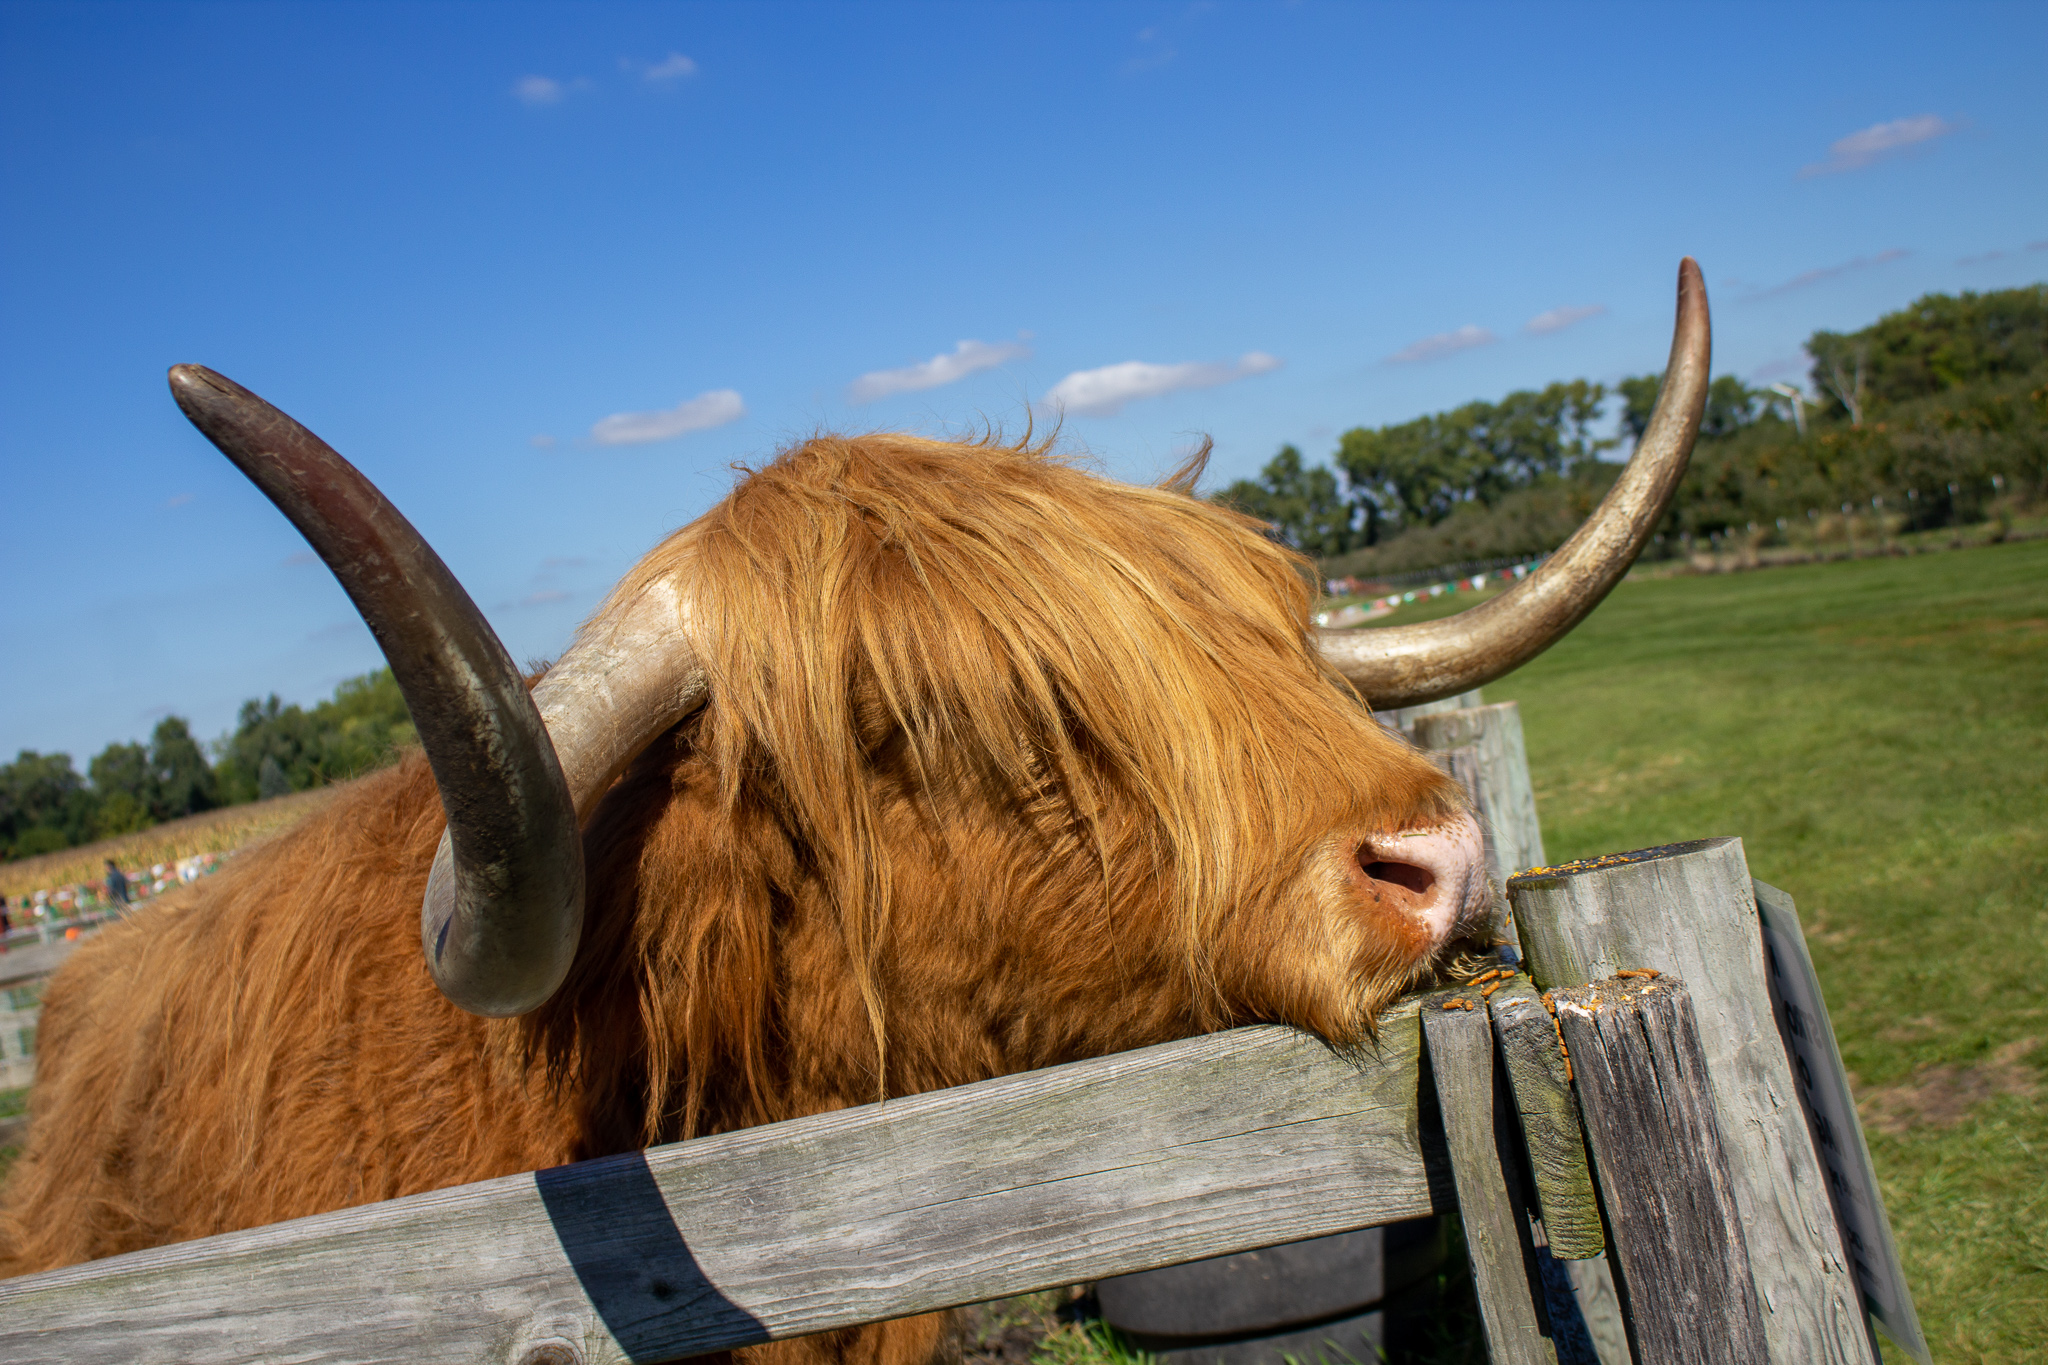 A Highland cow with long reddish fur and long curved horns rests its nose on a fence post